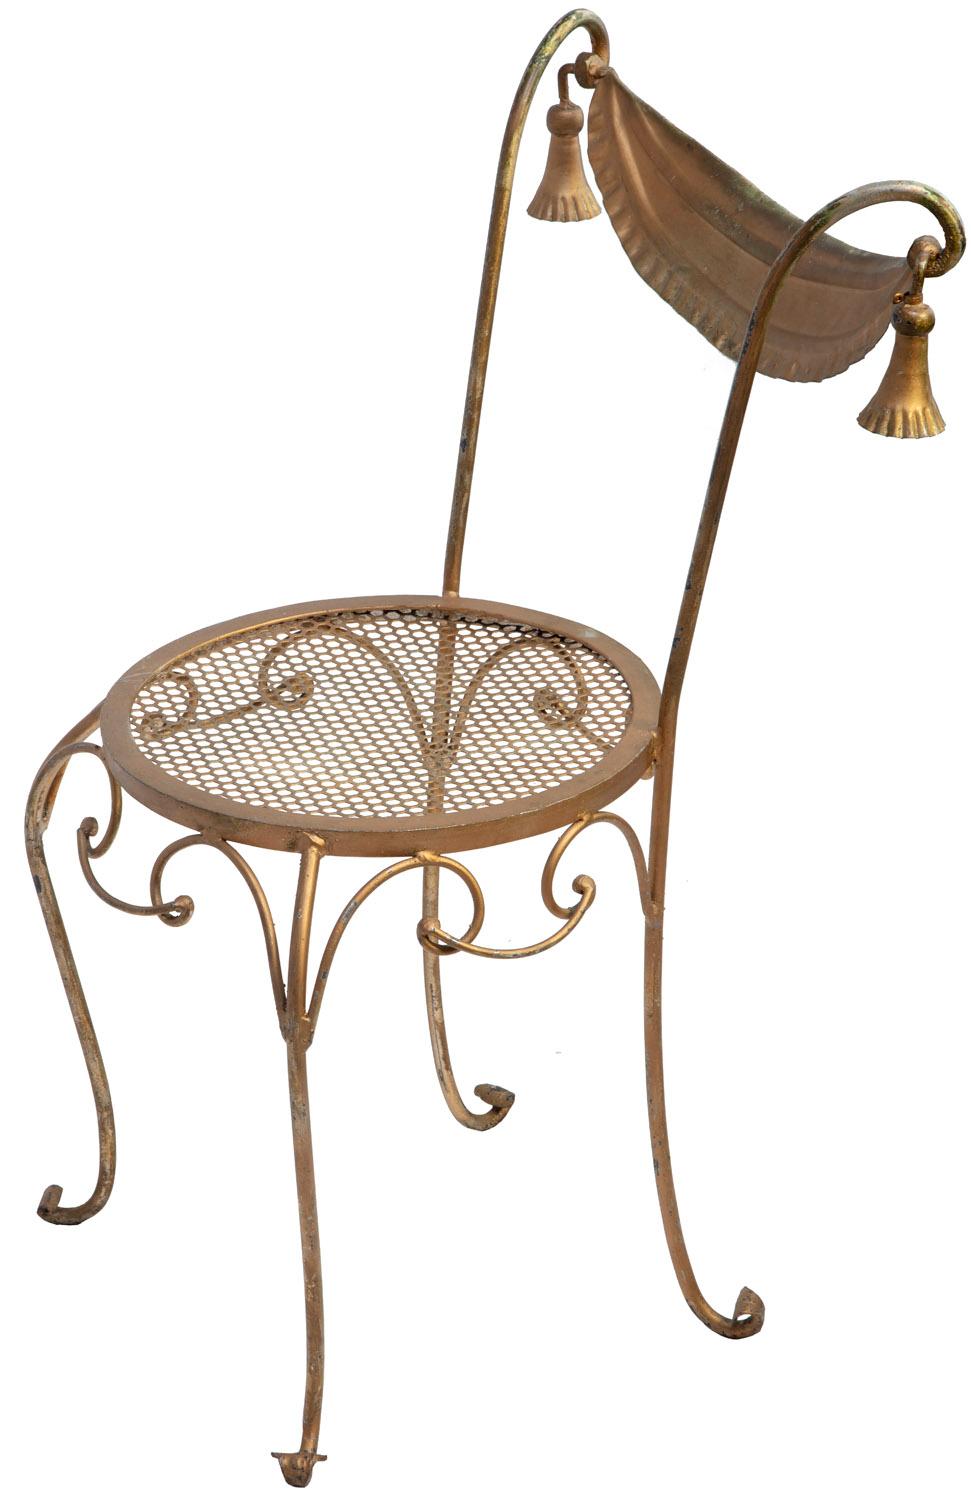 Gold painted wrought iron chair with honeycomb pattern seat and tassels.